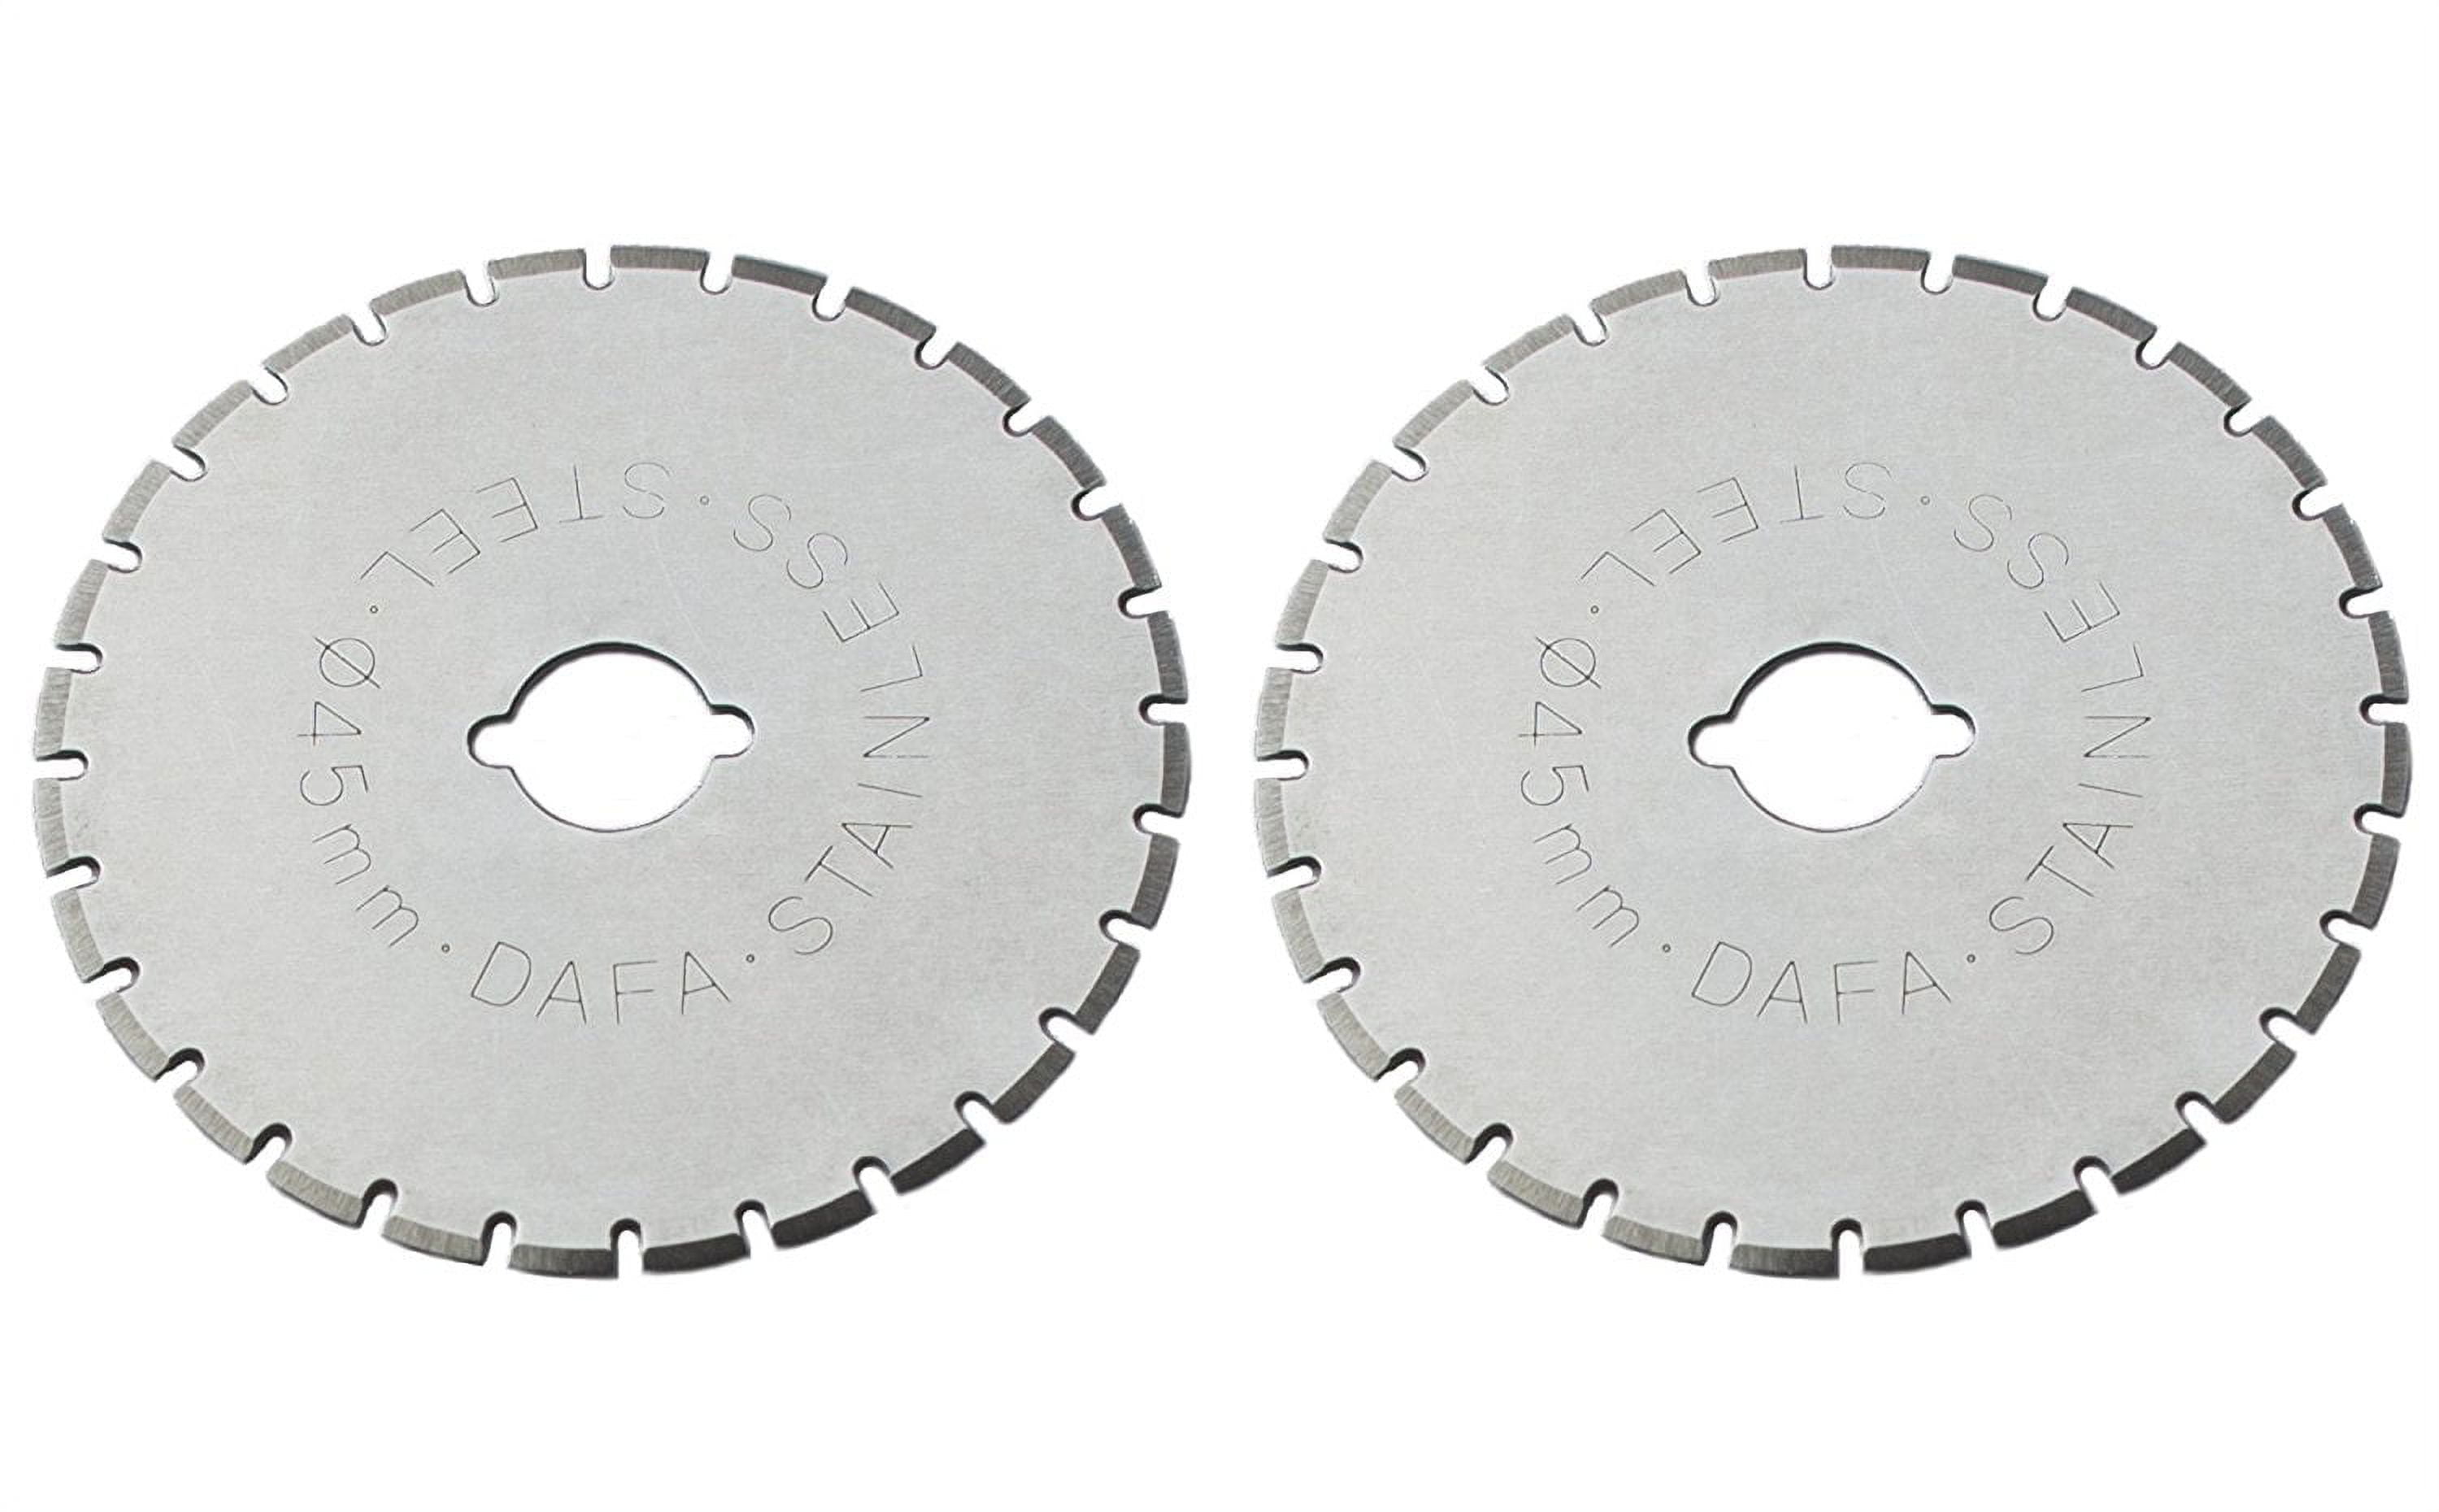 Fiskars Perforating Replacement Rotary Cutter Blades For 45mm